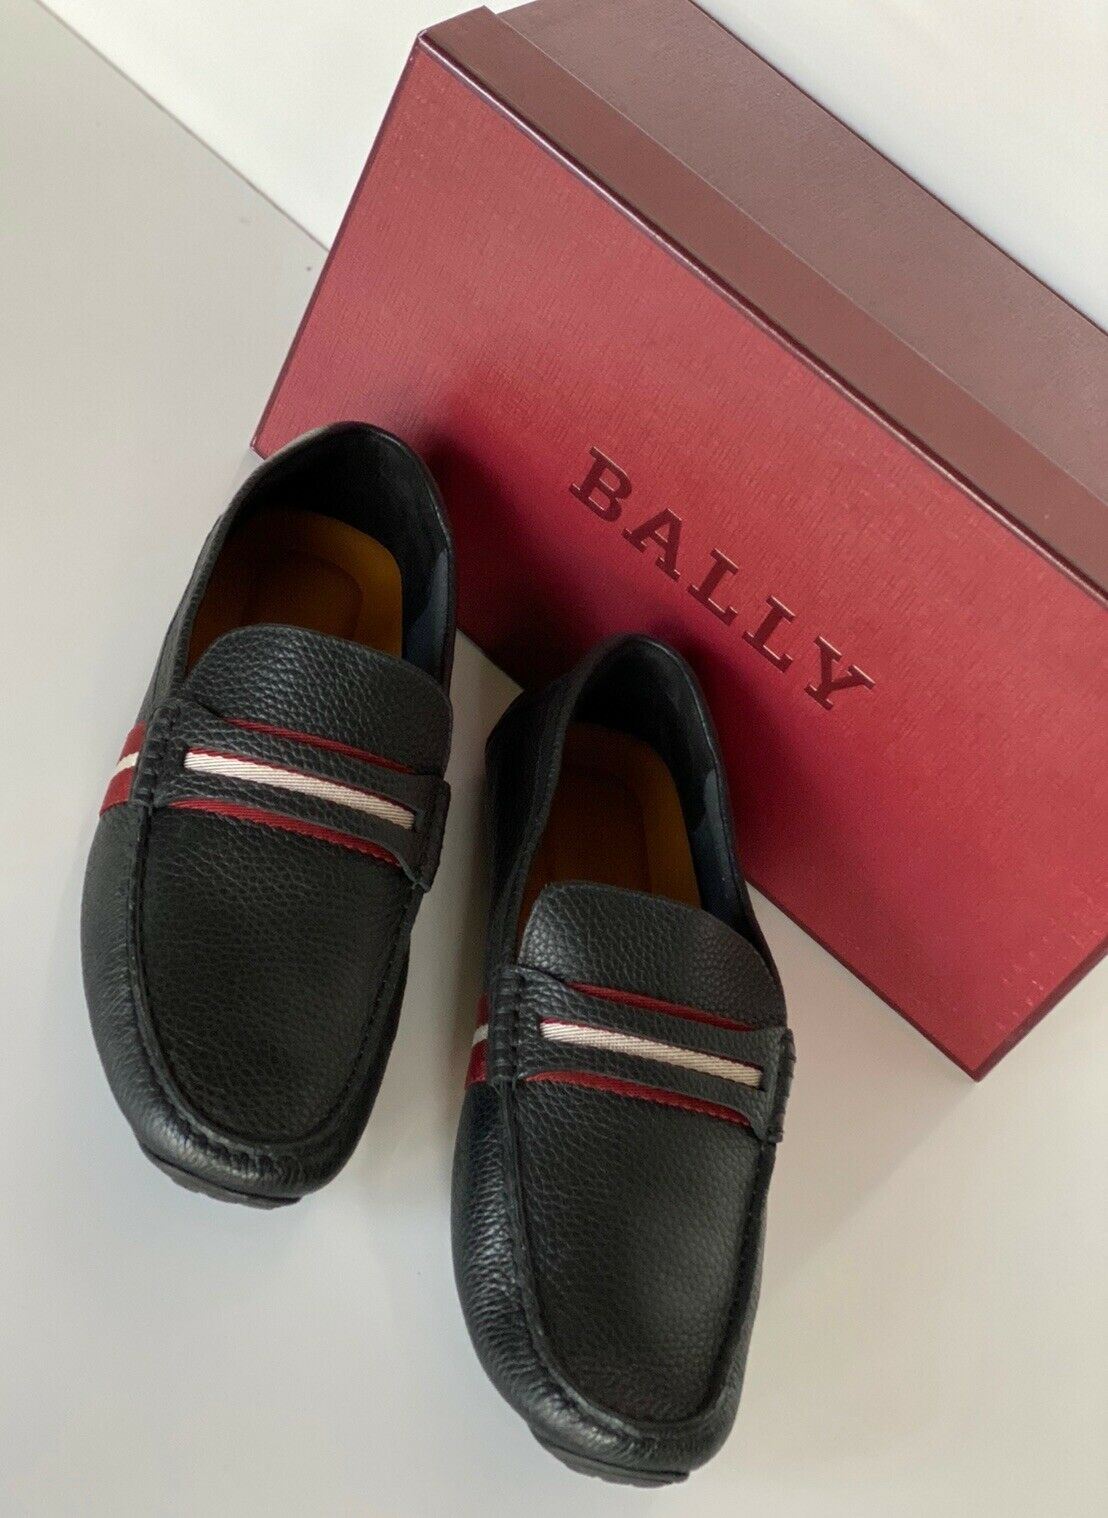 NIB Bally Mens Bovine Grained Leather Driver Shoes Black 10 D US 6228298 Italy